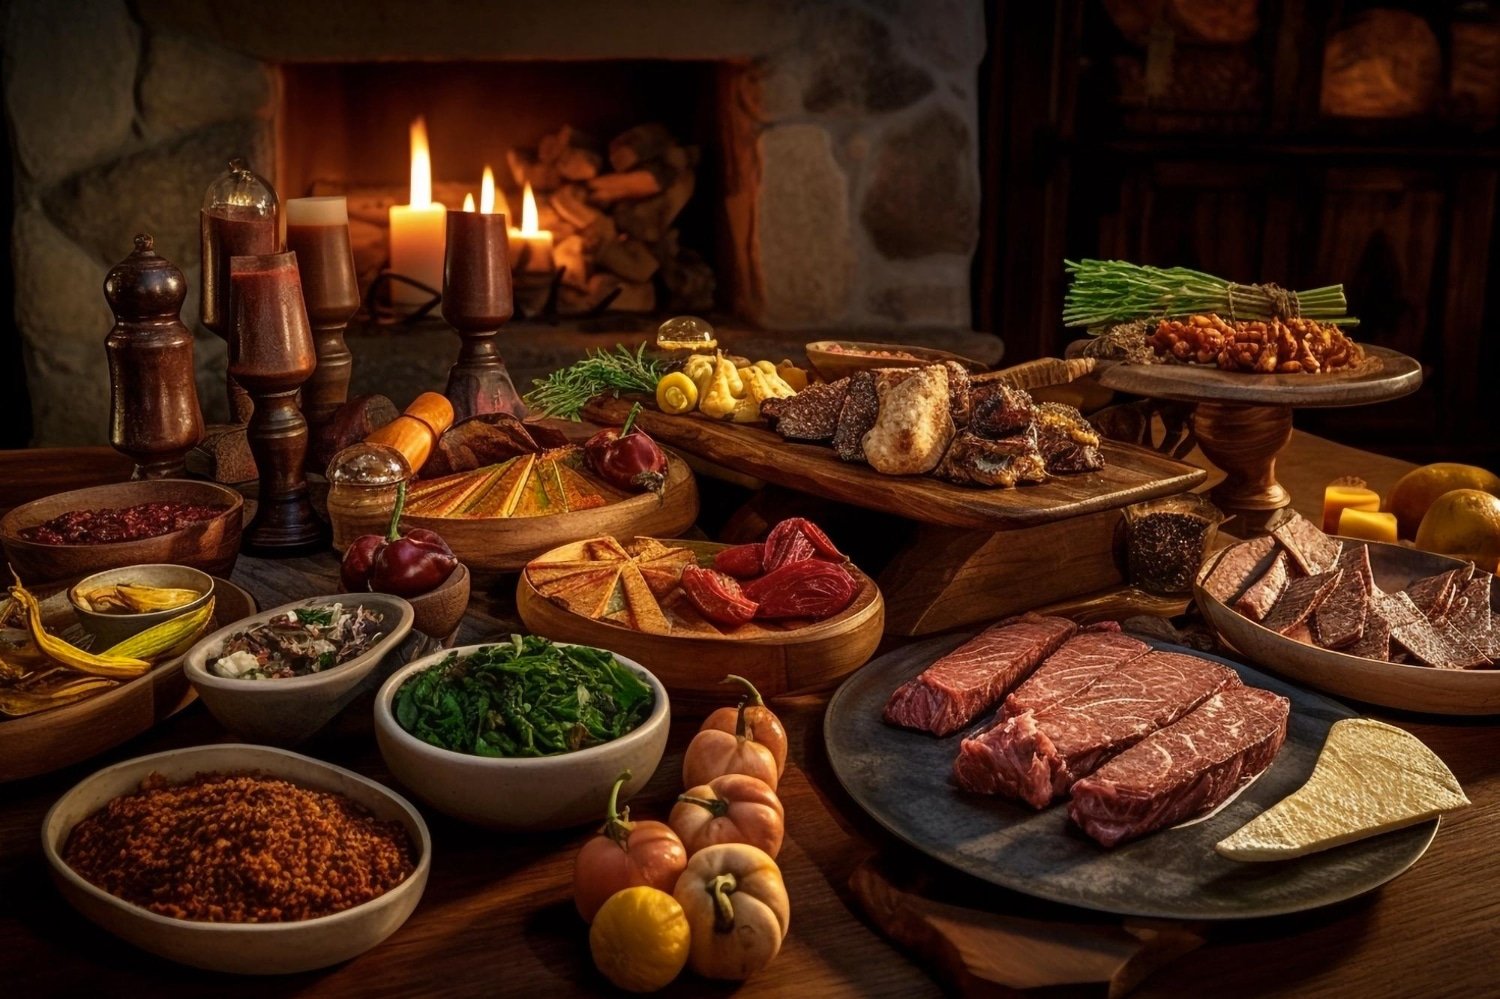 Savor Artisanal Flavors With North Country Smokehouse’s Craft Meats